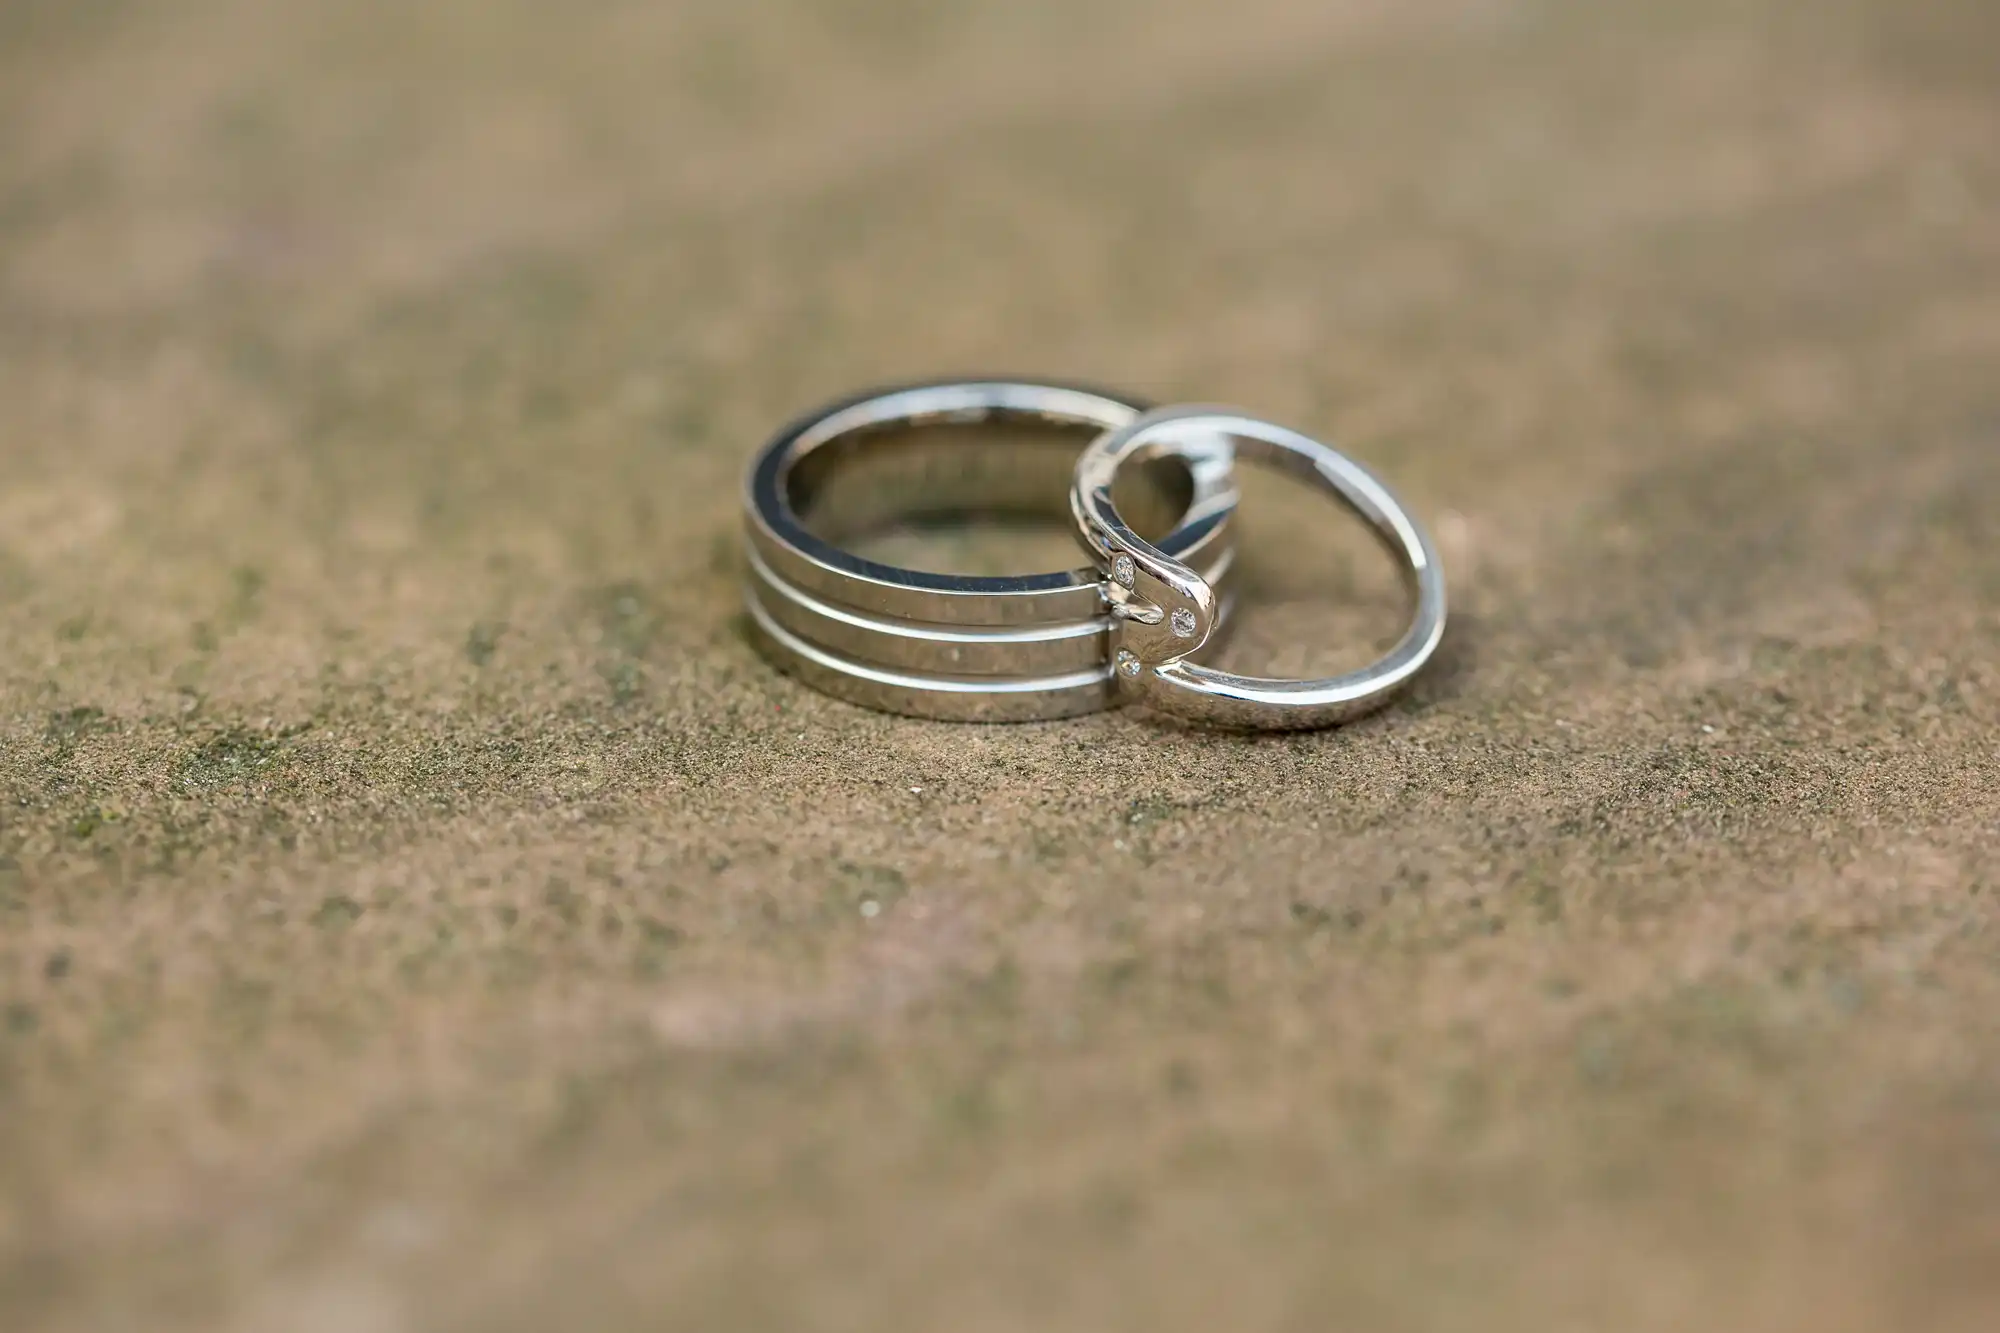 Two intertwined silver wedding rings placed on a textured surface, one ring featuring a small diamond.